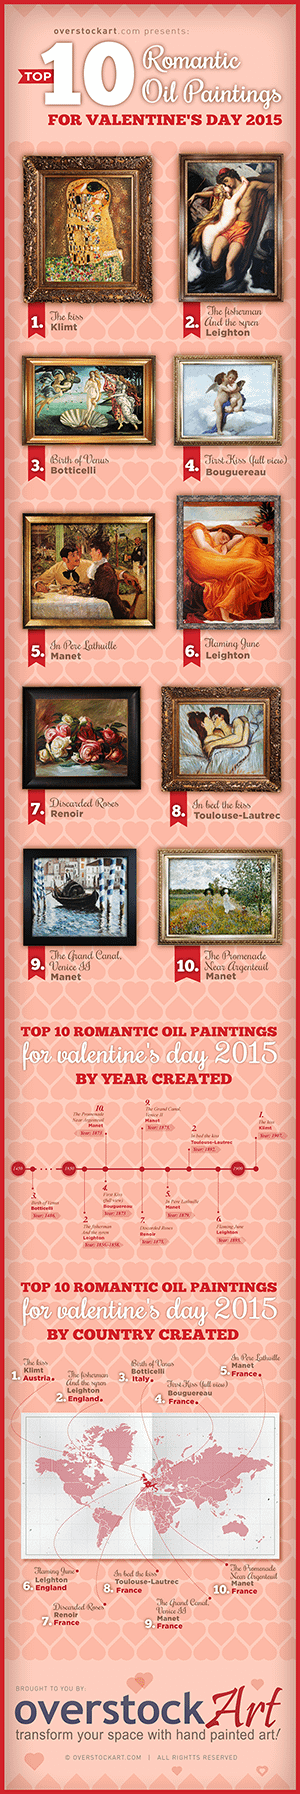 Top 10 Art for Valentine's Day 2015 List